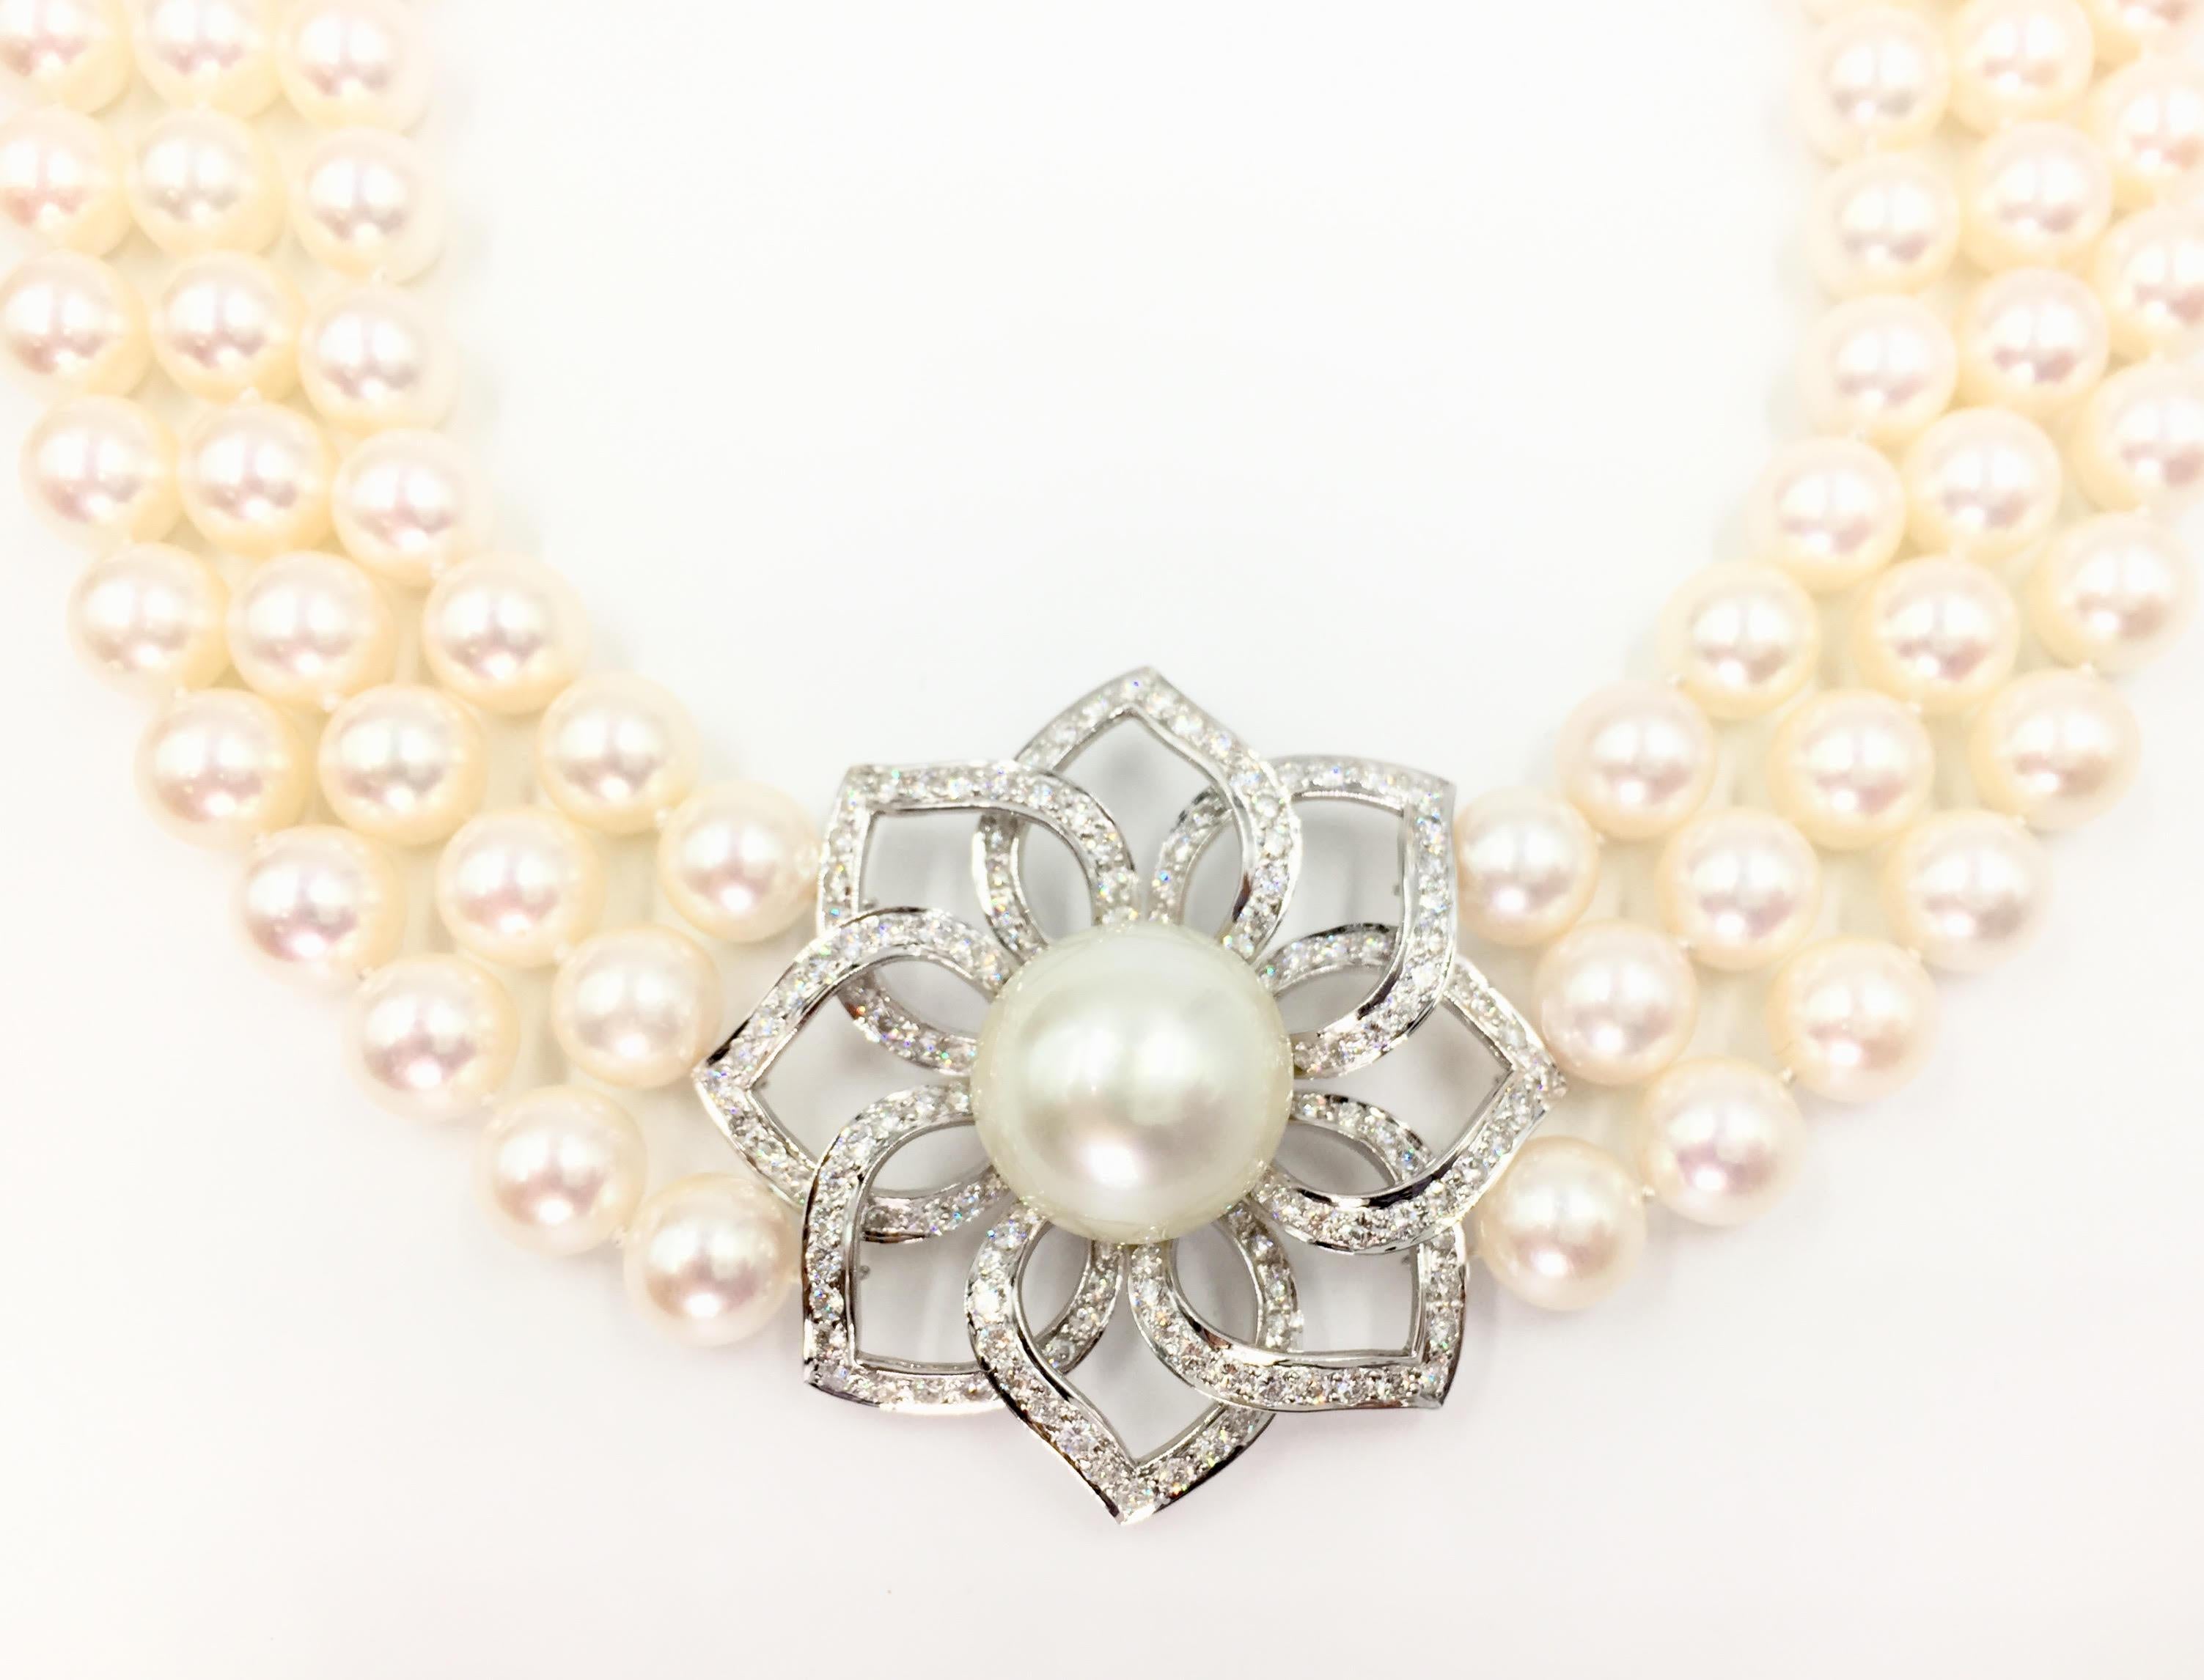 Gorgeous three strand Akoya cultured pearl necklace with stationary diamond and South Sea pearl flower center pendant. Necklace is composed of 122 beautifully matched, lustrous white 9mm cultured pearls. Open diamond flower center pendant measures